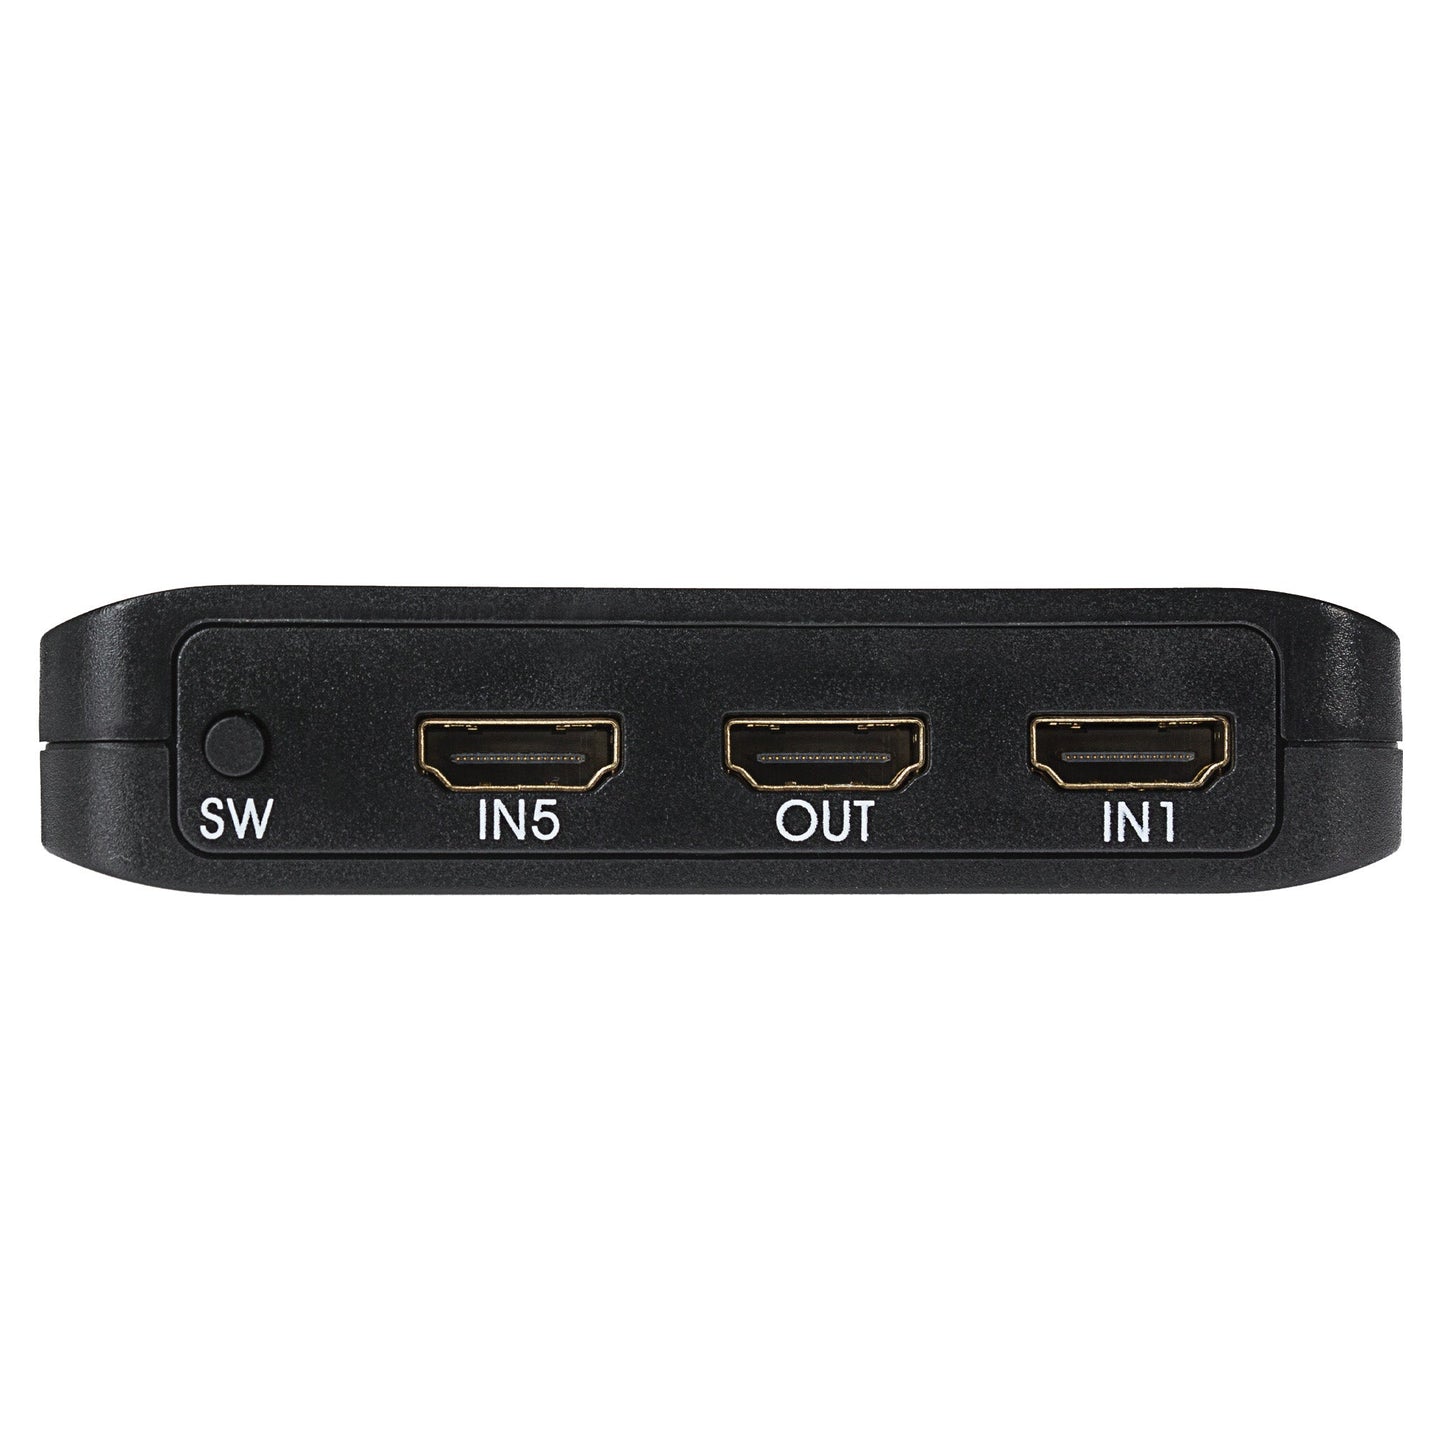 Nikkai HDMI Switch 5 Port in 1 Port Out 4K 60Hz Resolution with Remote Control - Black - maplin.co.uk